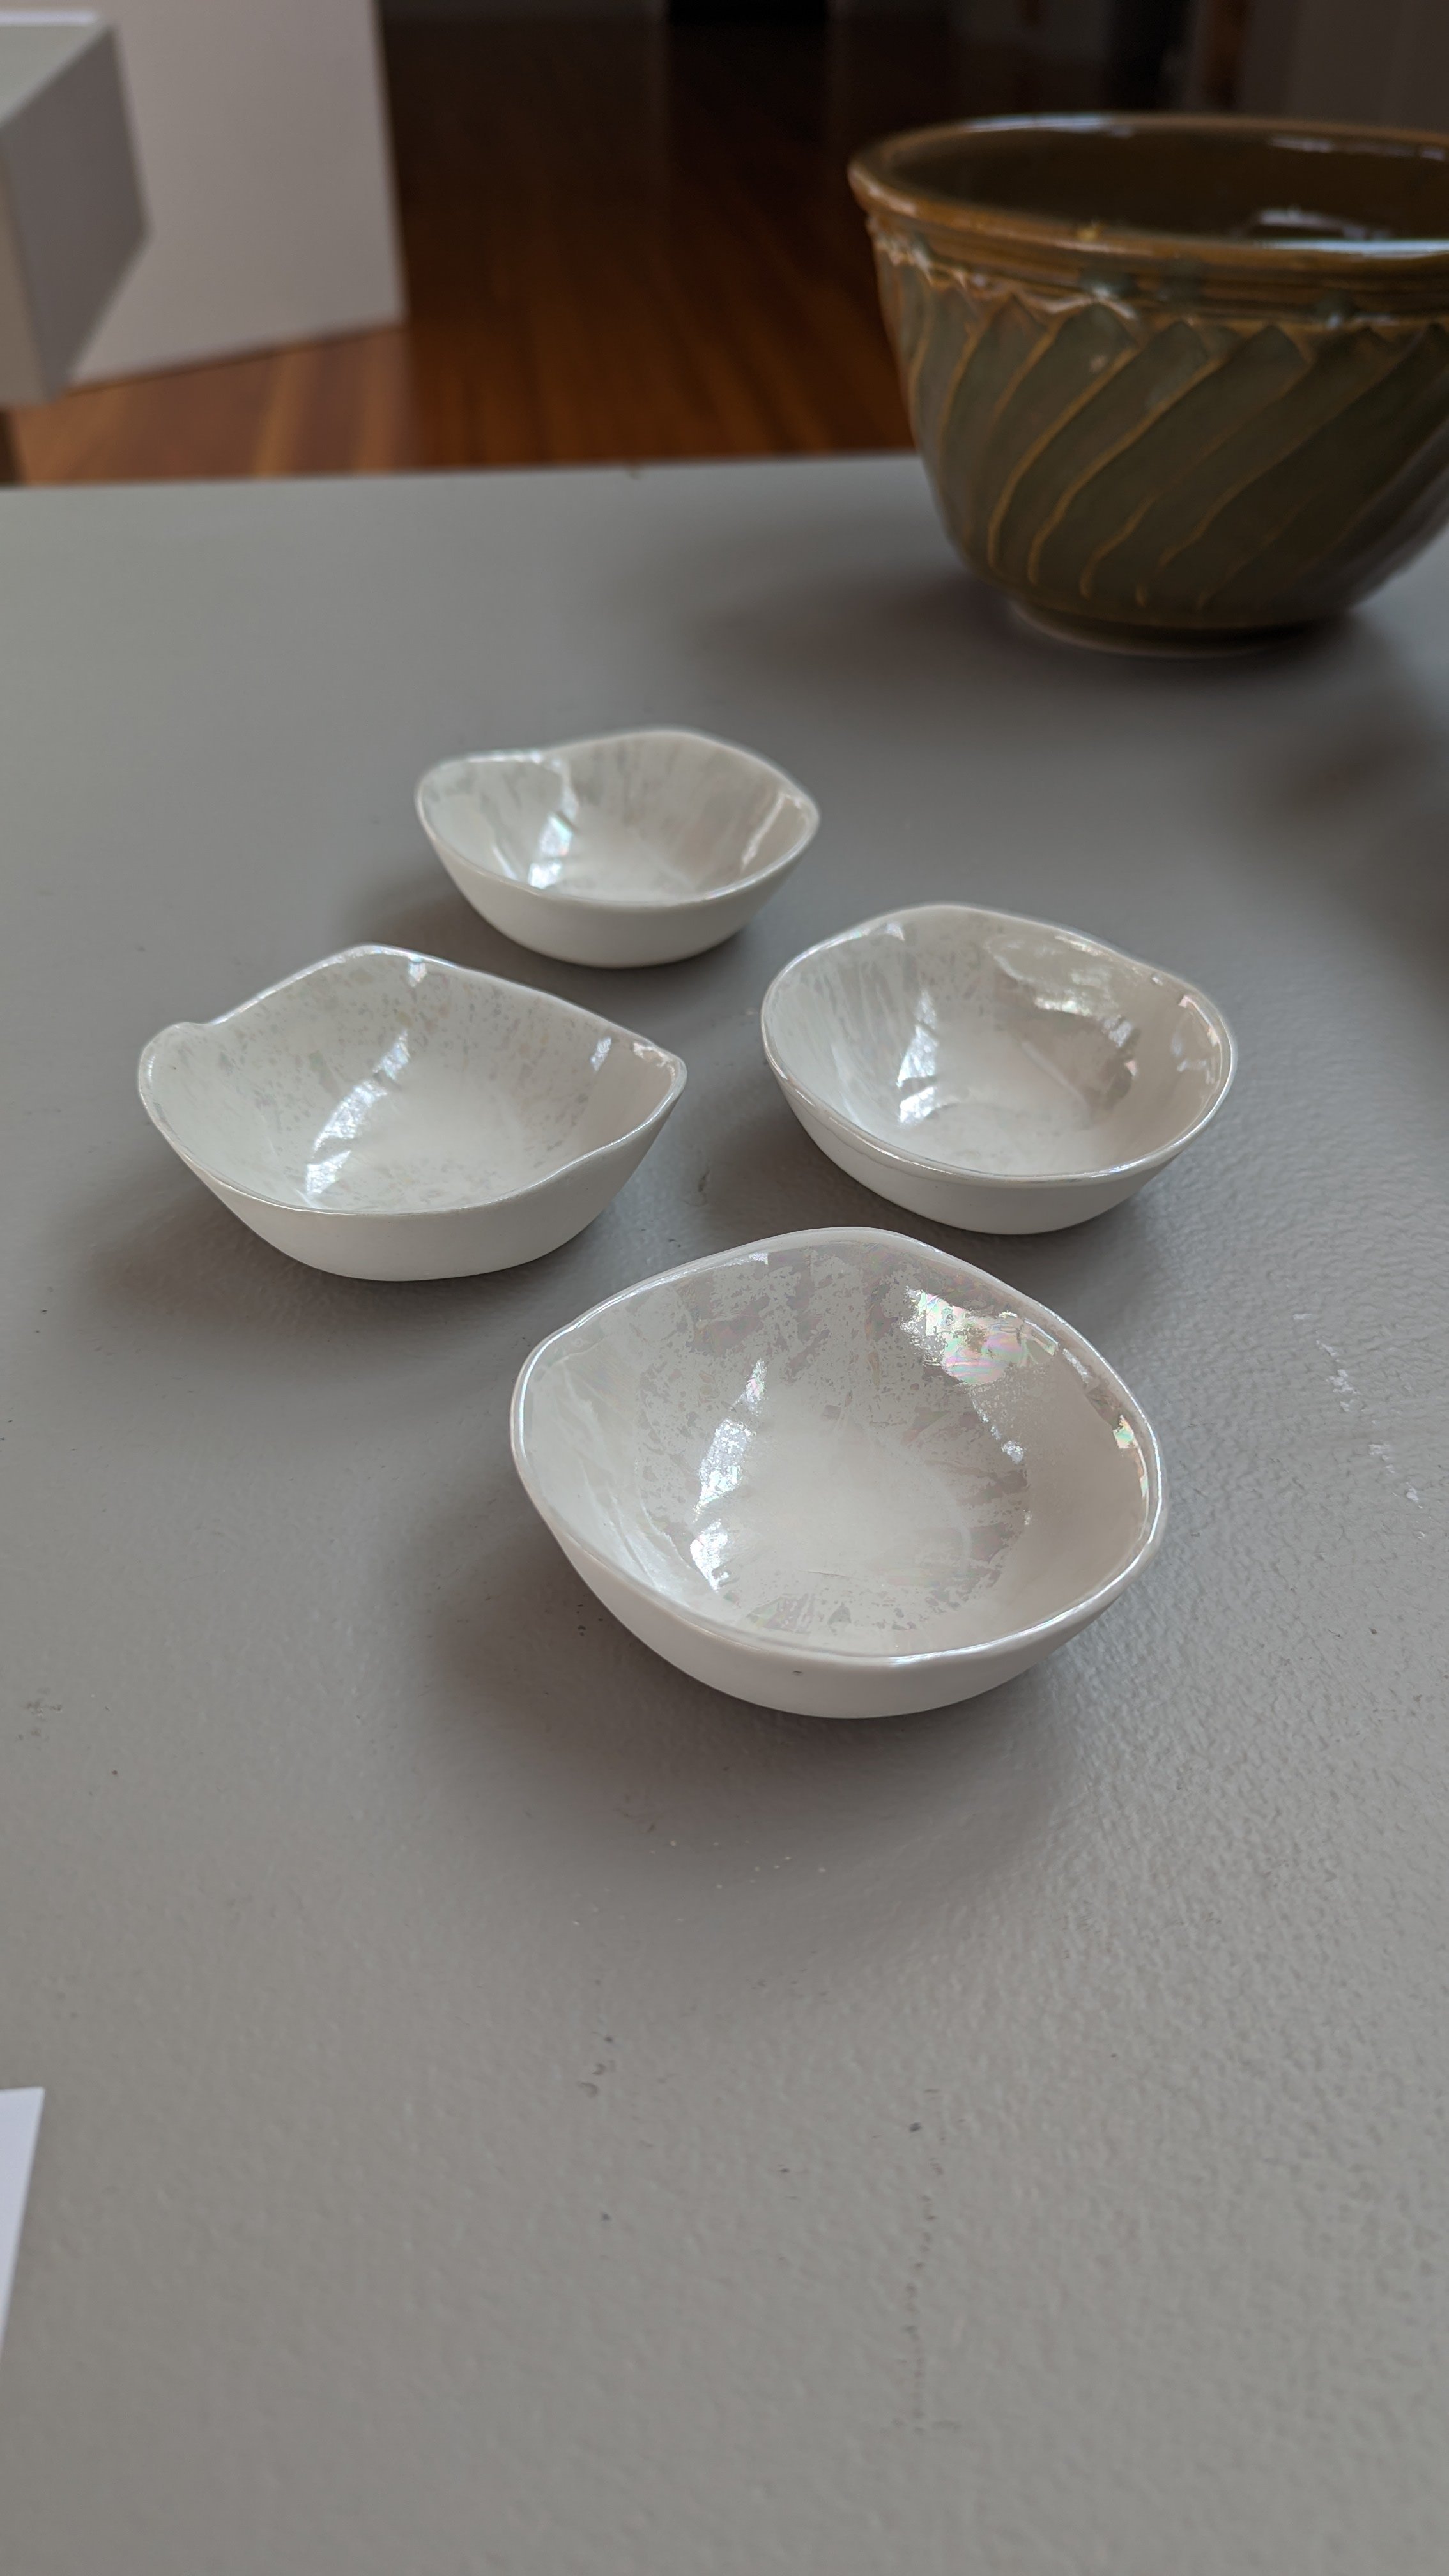 Petite Set of 4 Porcelain Dishes by Yve Gray.jpg